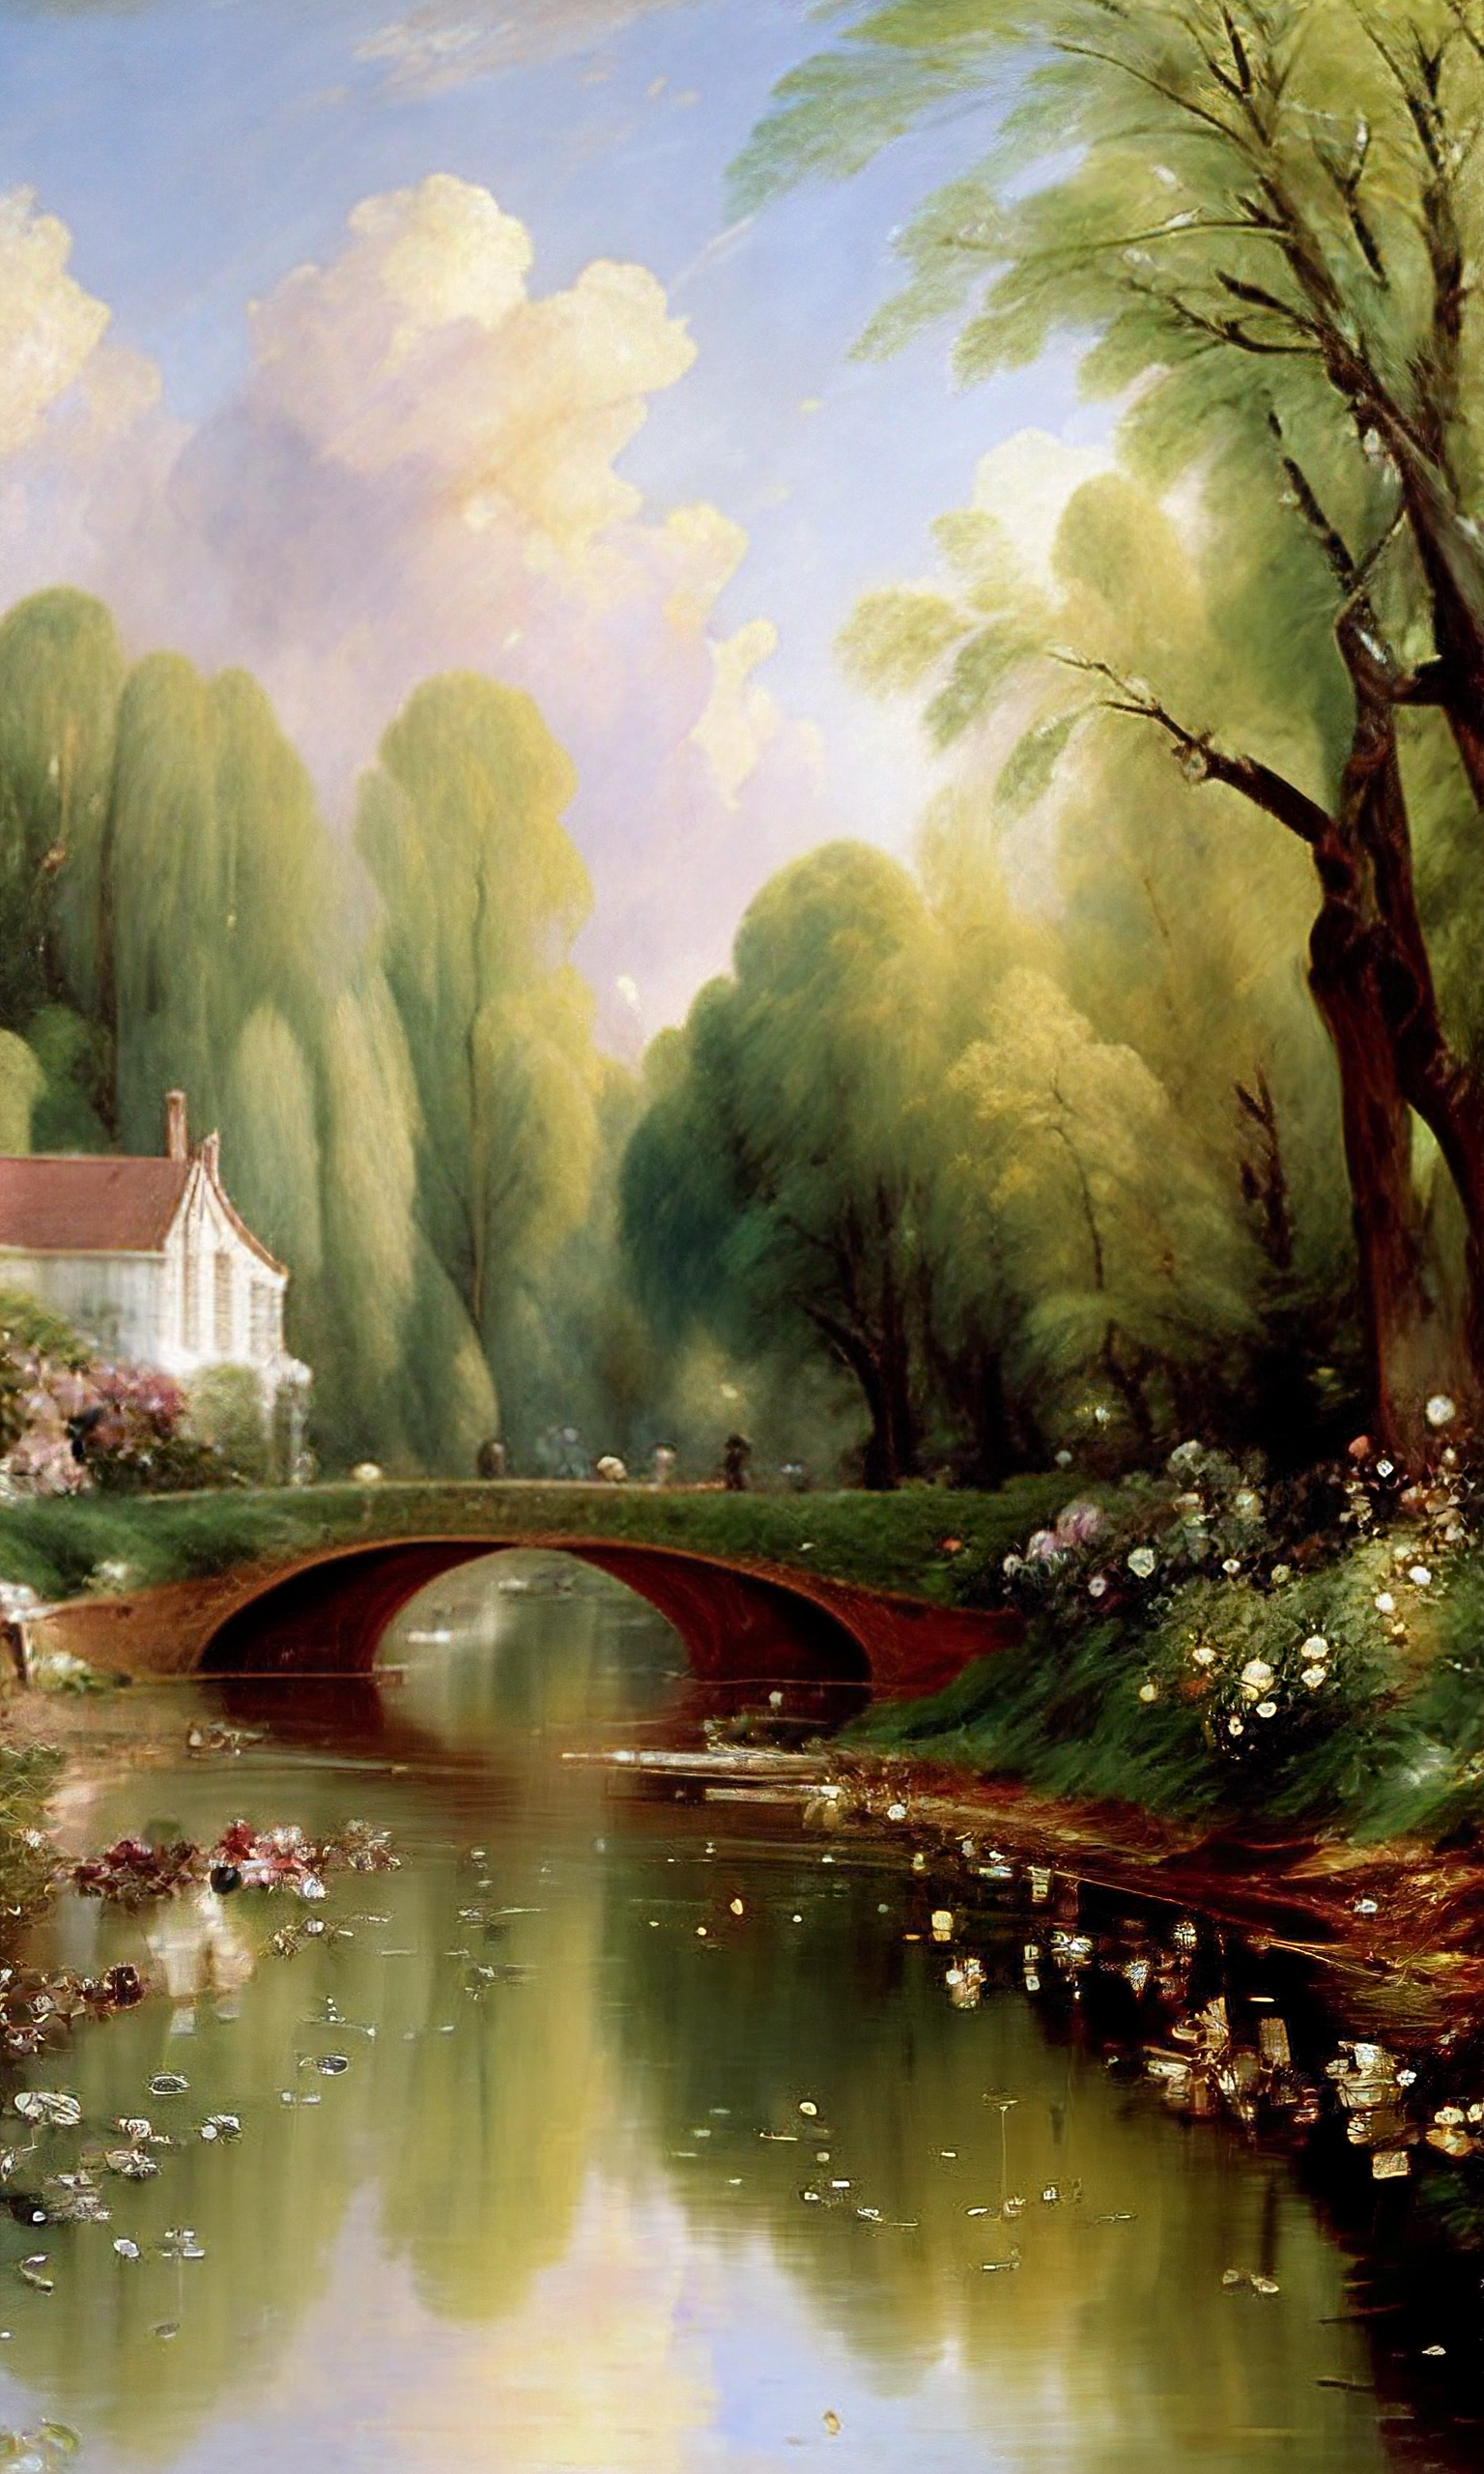 painting of a country scene with a bridge and a house